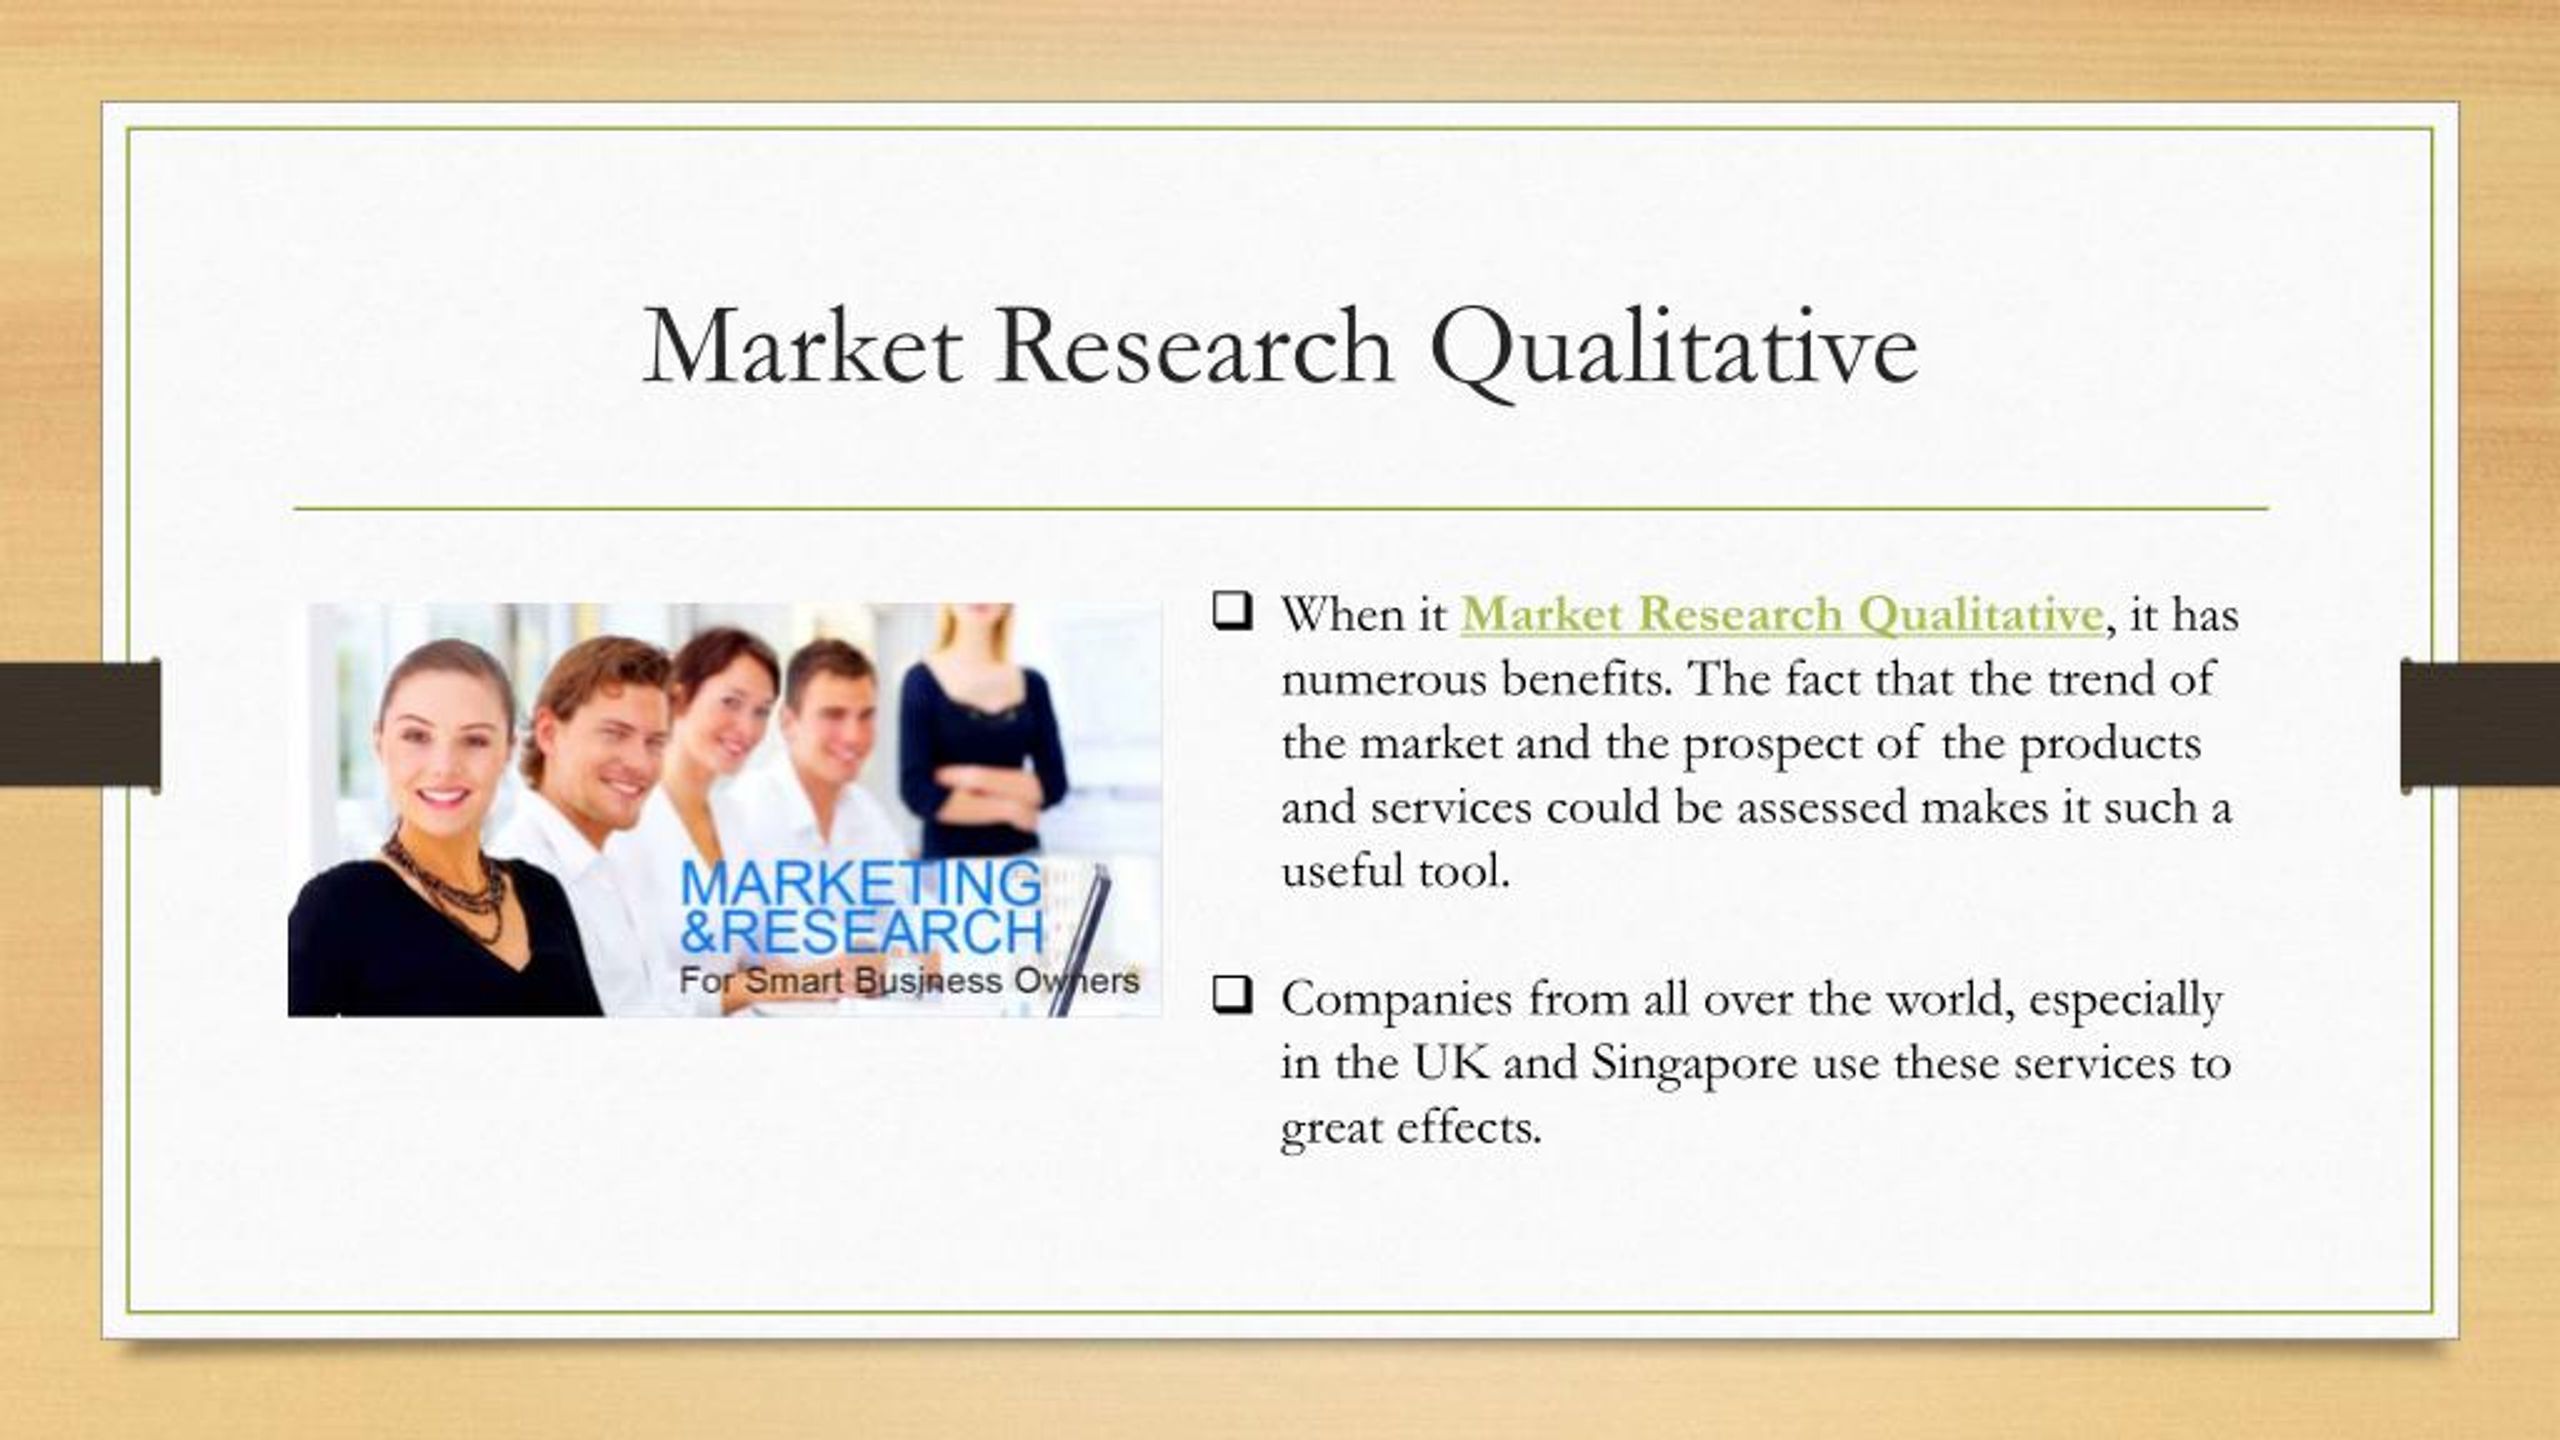 definition of qualitative market research